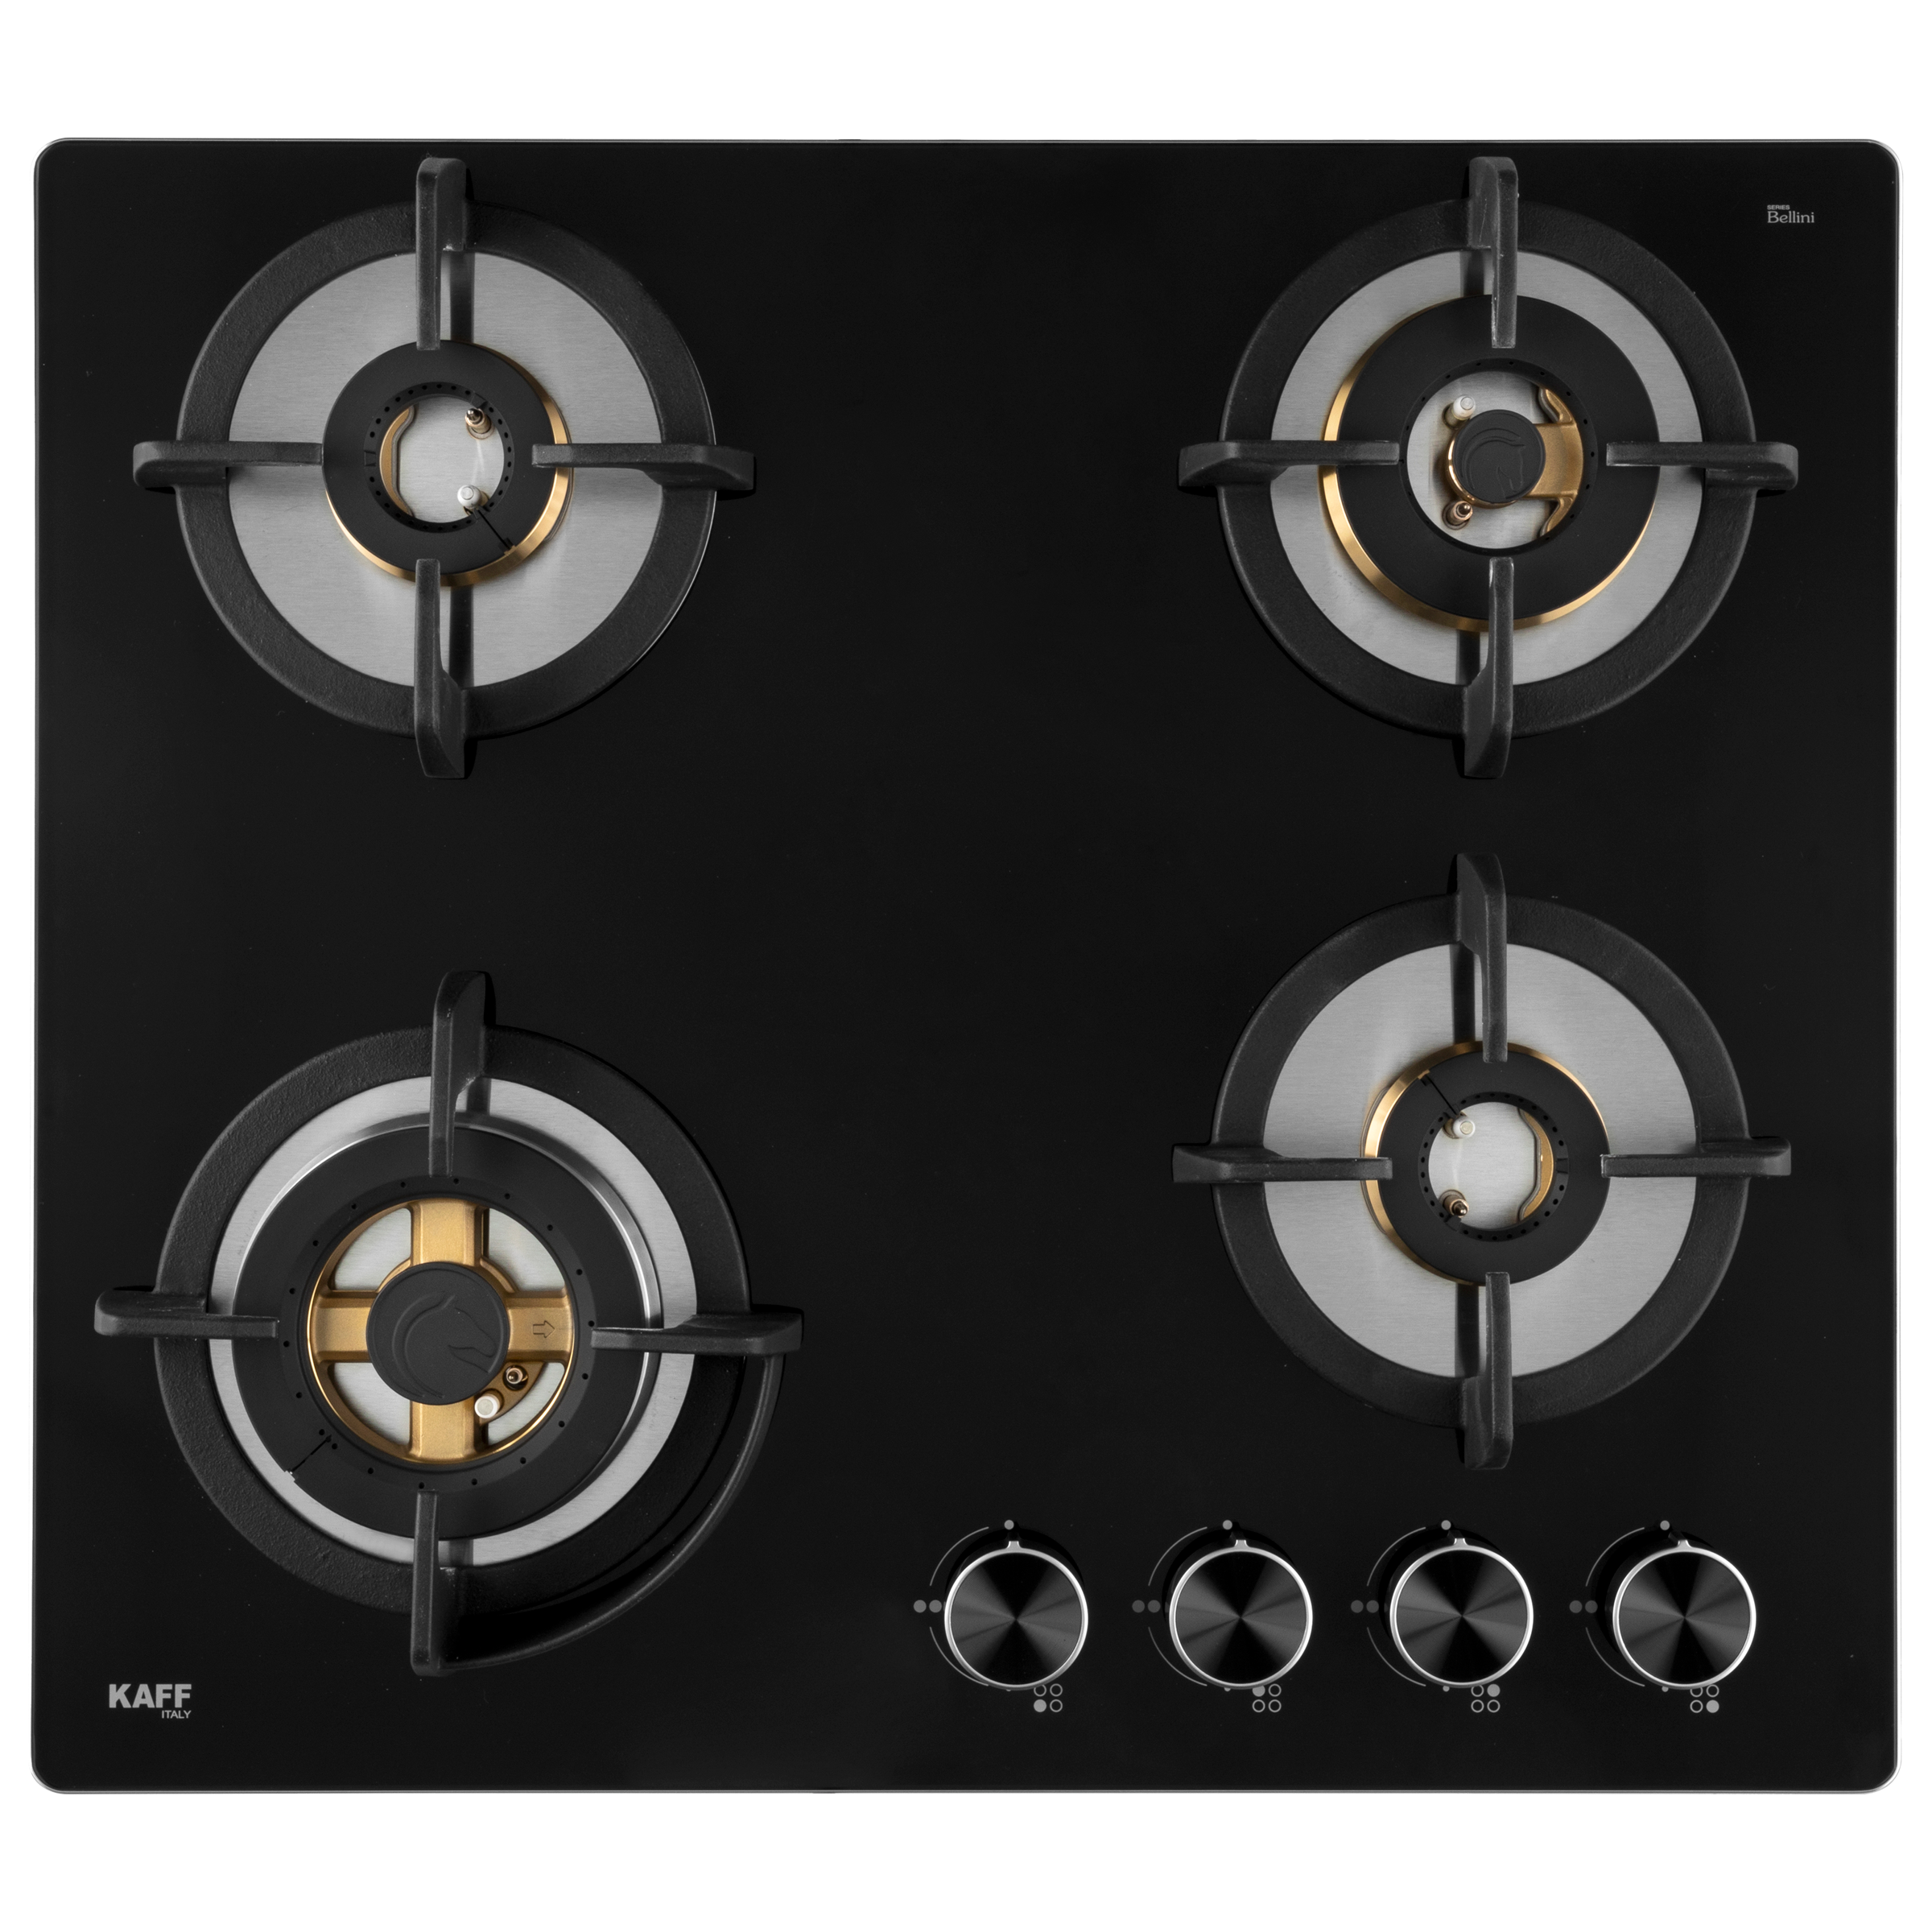 KAFF 4 Burner Black Tempered Glass Built-in Gas Hob (Flame Failure Device with Heavy Duty Cast Iron Pan Support, BLH 604, Black)_1